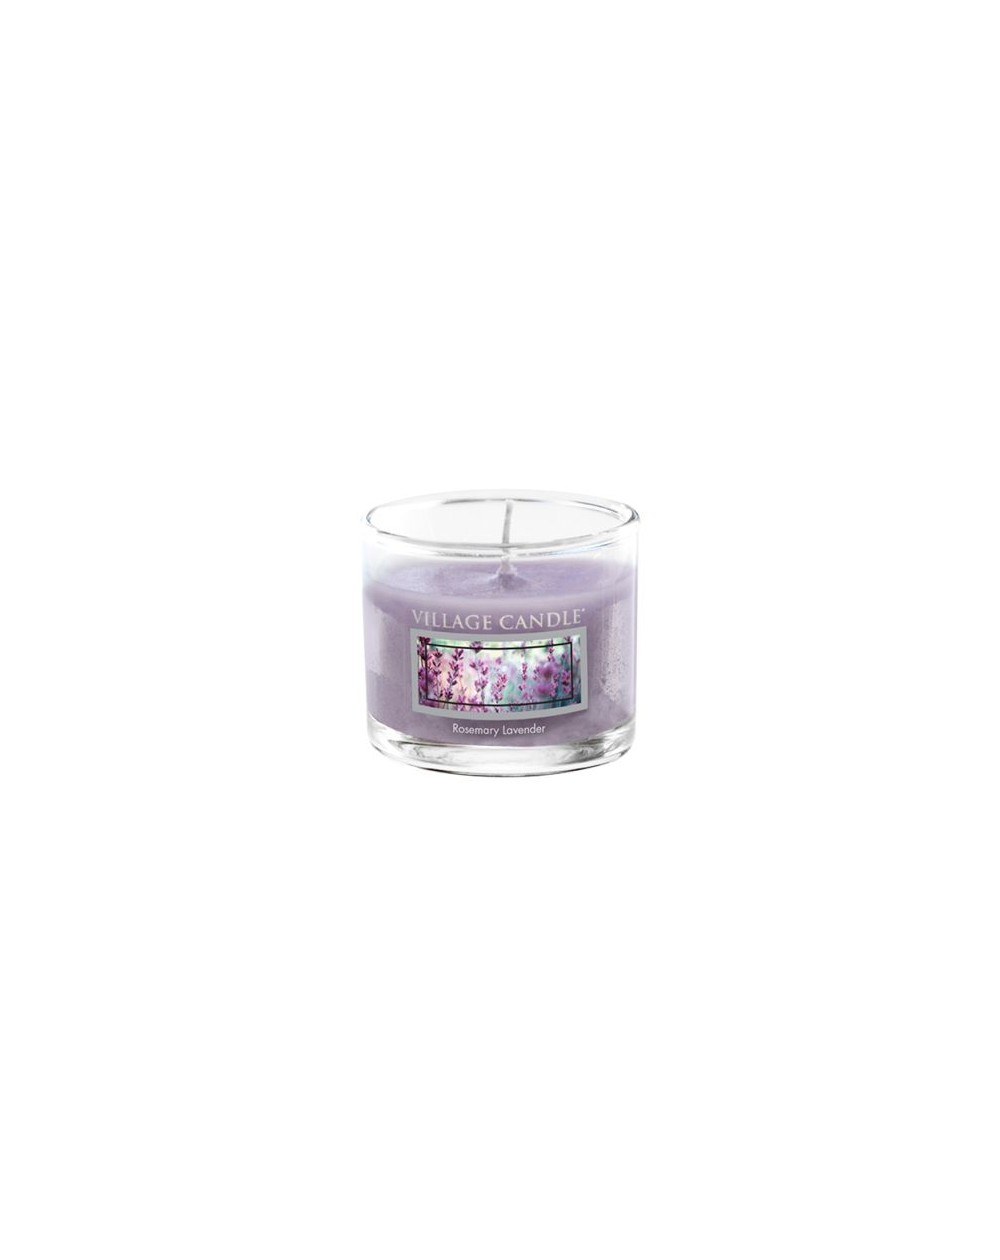 MINI GLASS VILLAGE CANDLE ROSEMARY LAVENDER